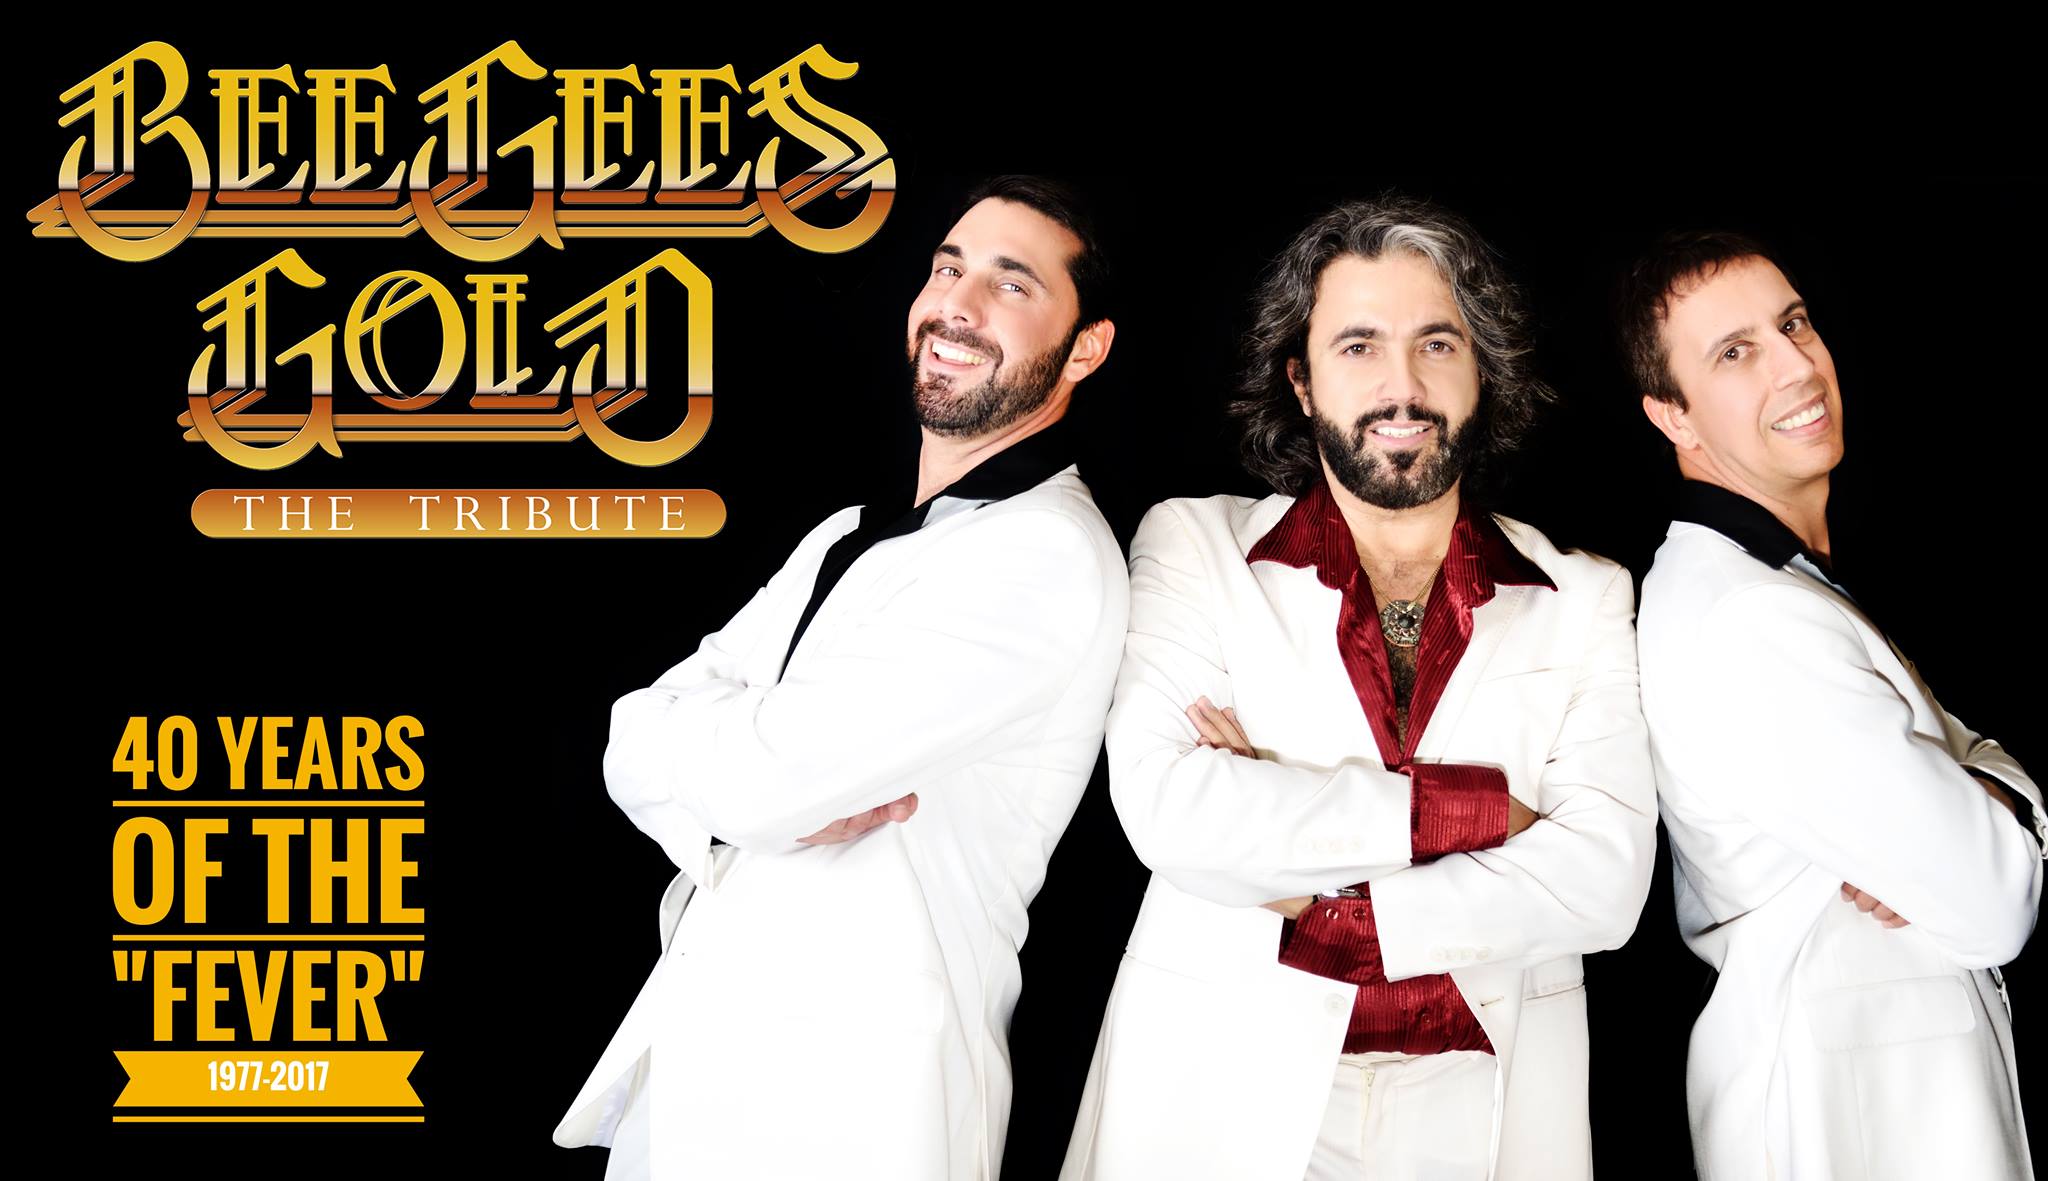 Bee Gees Gold Tribute